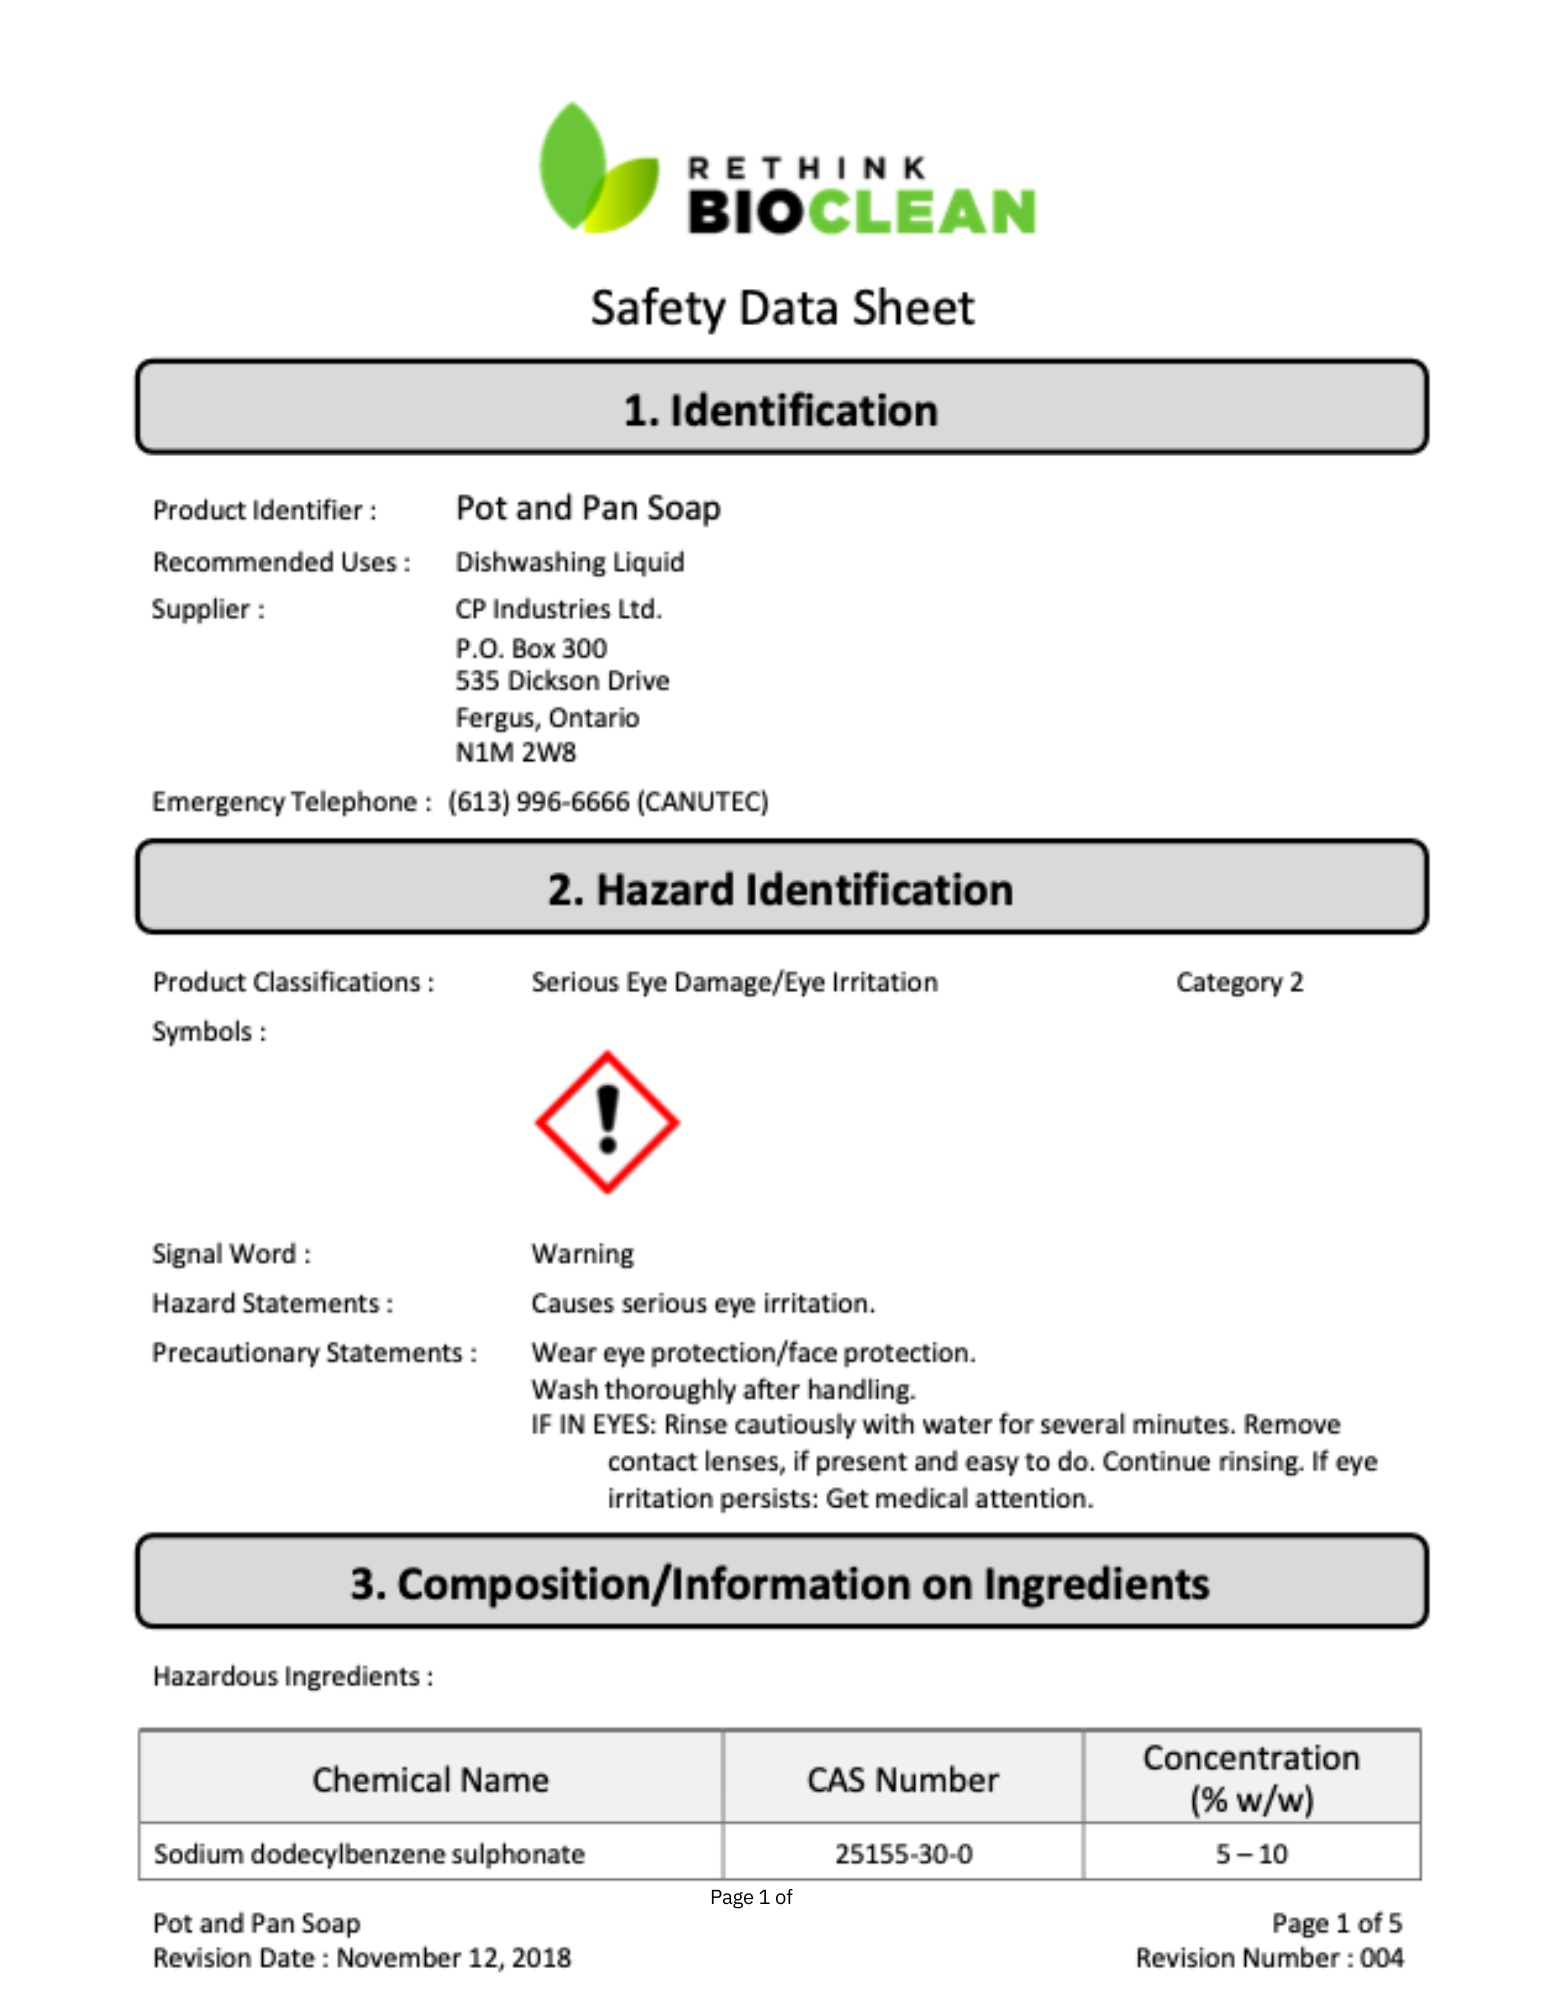 Safety Data Sheet from ReThink BioClean for Pot and Pan Soap.